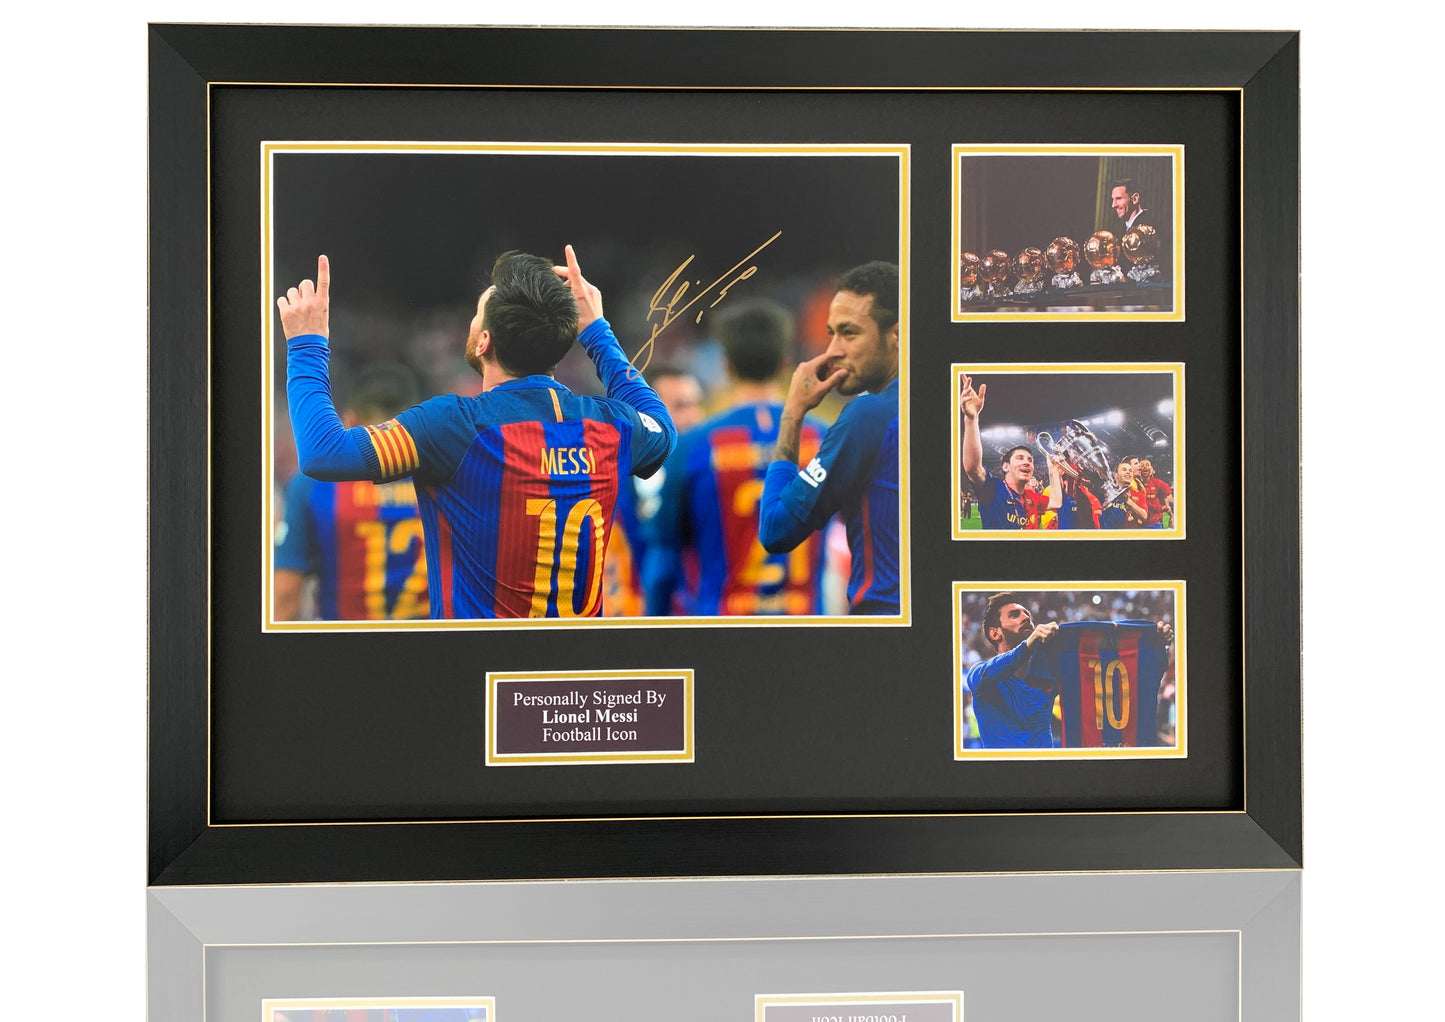 Lionel Messi Signed Photo Montage Display